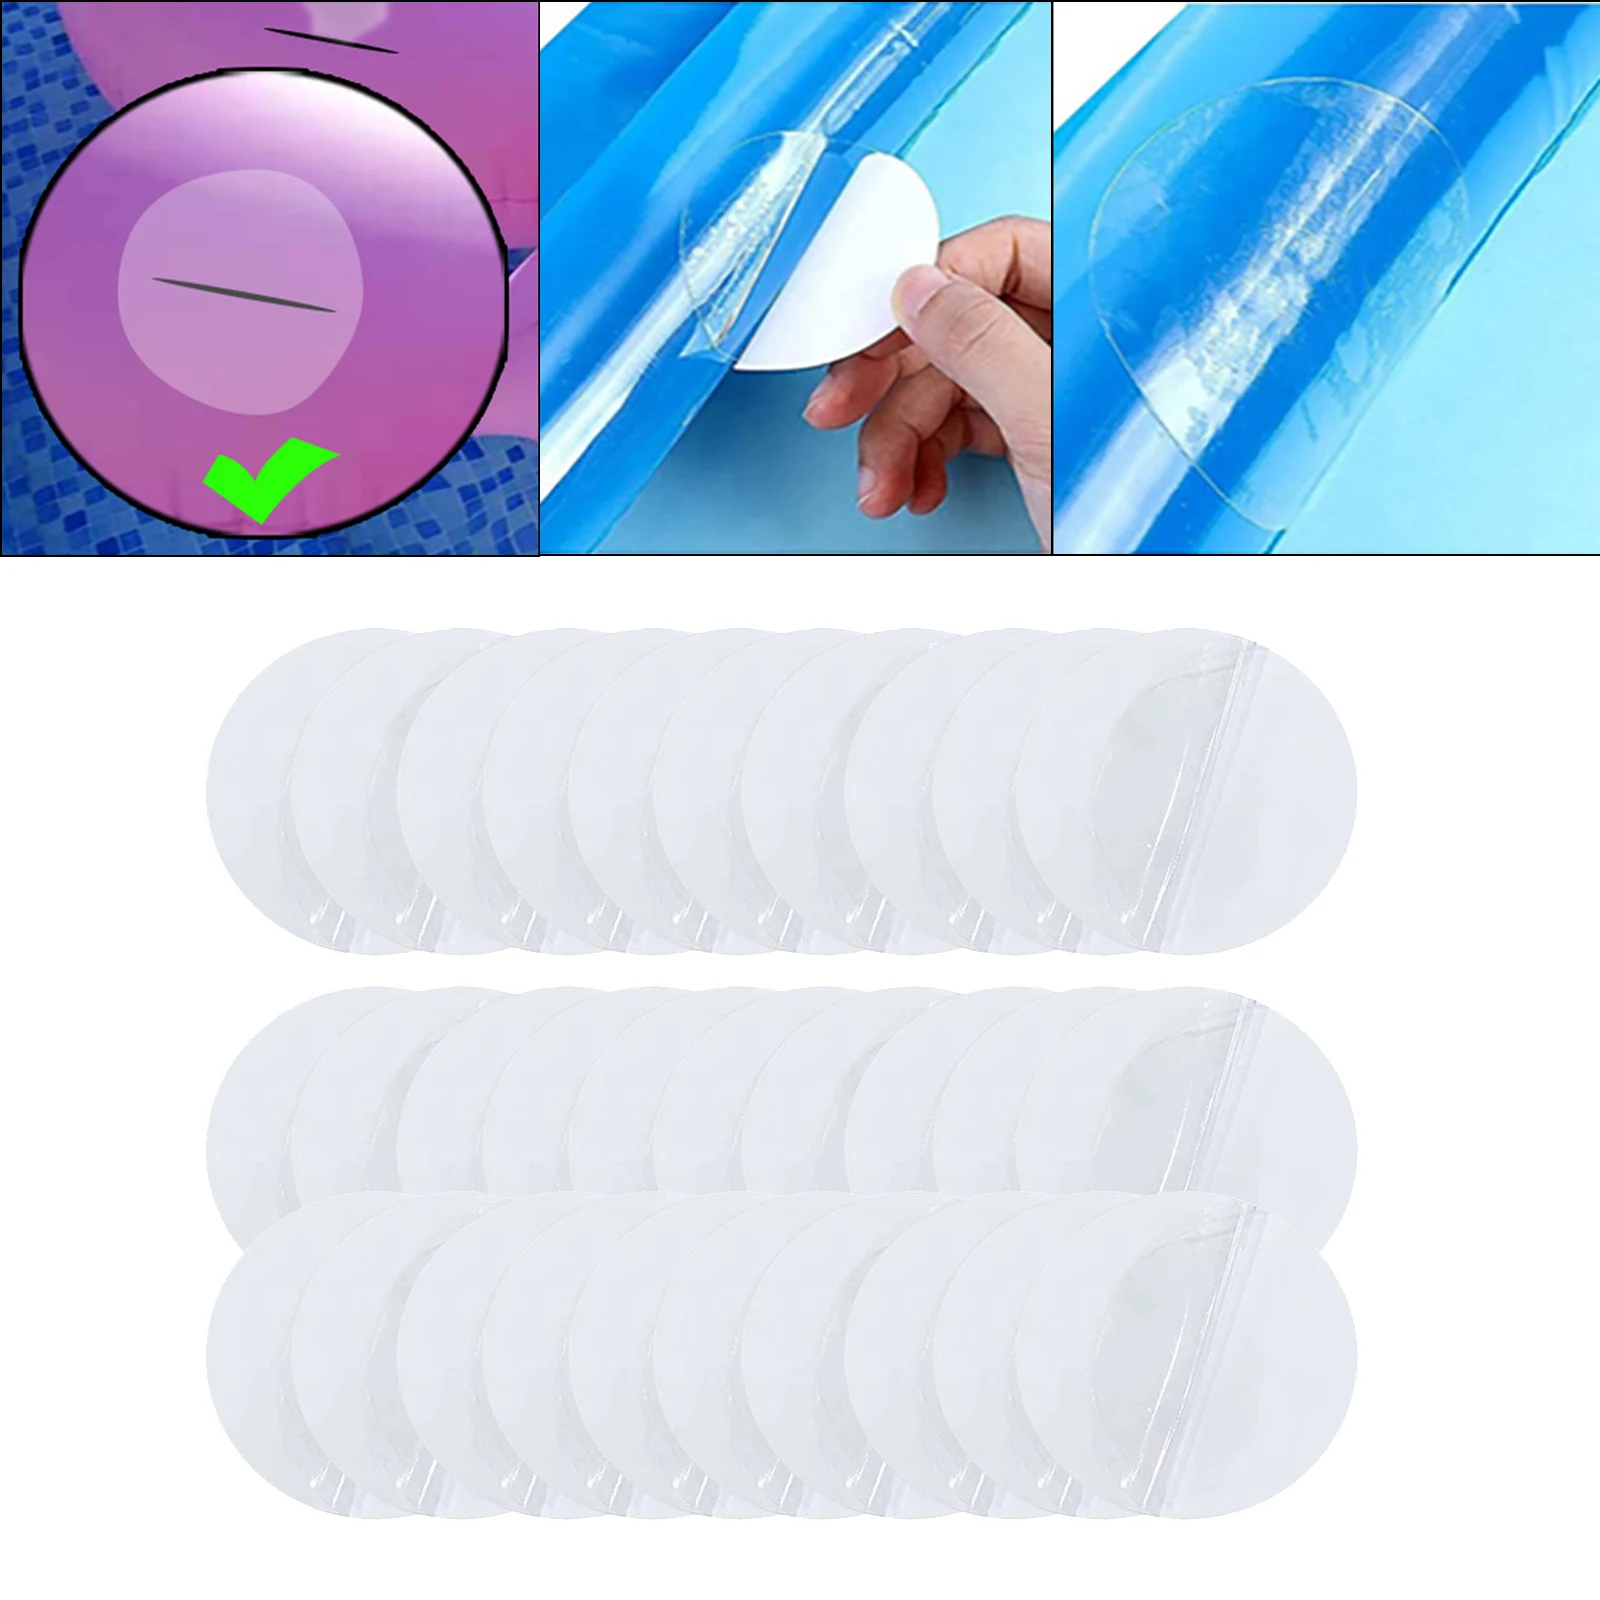 Self-Adhesive Repair Patches Tape Betorcy J1 Pool Patch Kit 1-Roll Heavy Duty Patch & Seal Tape 2” x 59‘ Waterproof Pool Liner Patch for Inflatable Pool Boat Toys Trampoline Swimming Ring Balloon 